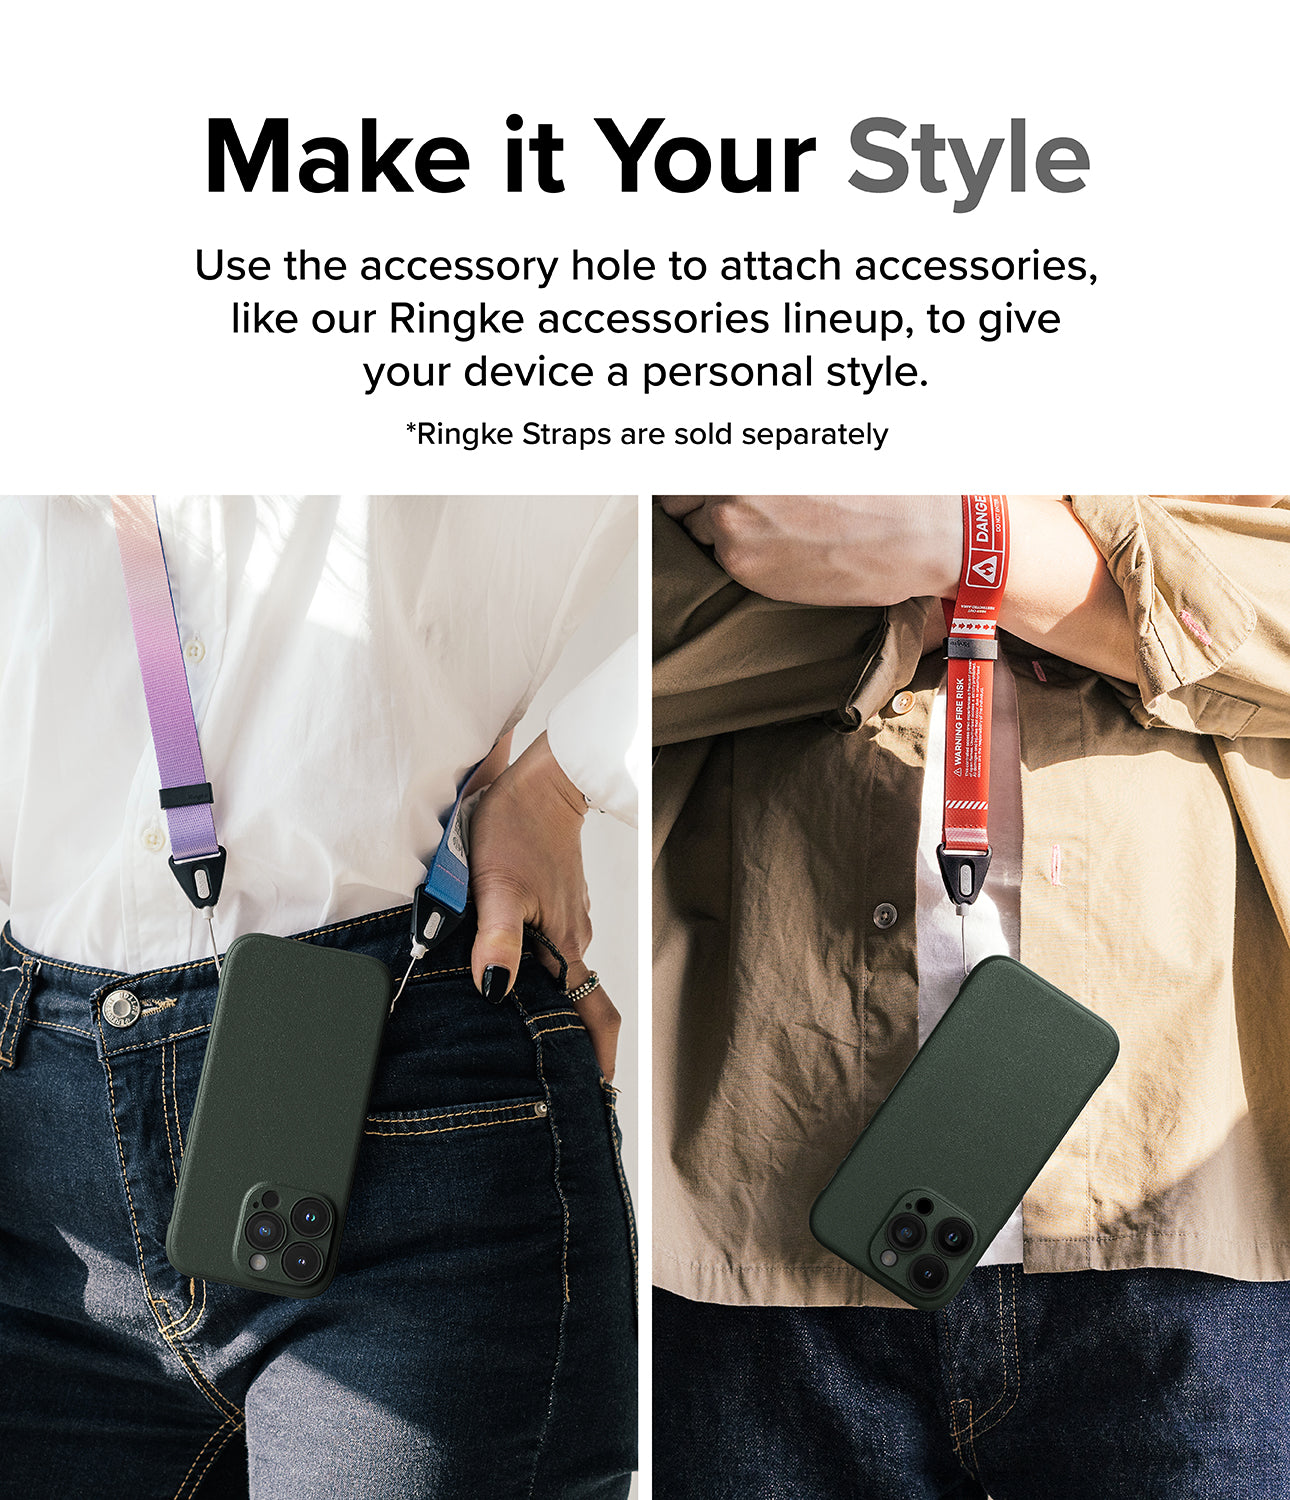 iPhone 15 Pro Case | Onyx - Dark Green - Make it Your Style. Use the accessory hole to attach accessories, like our Ringke accessories lineup, to give your device a personal style.